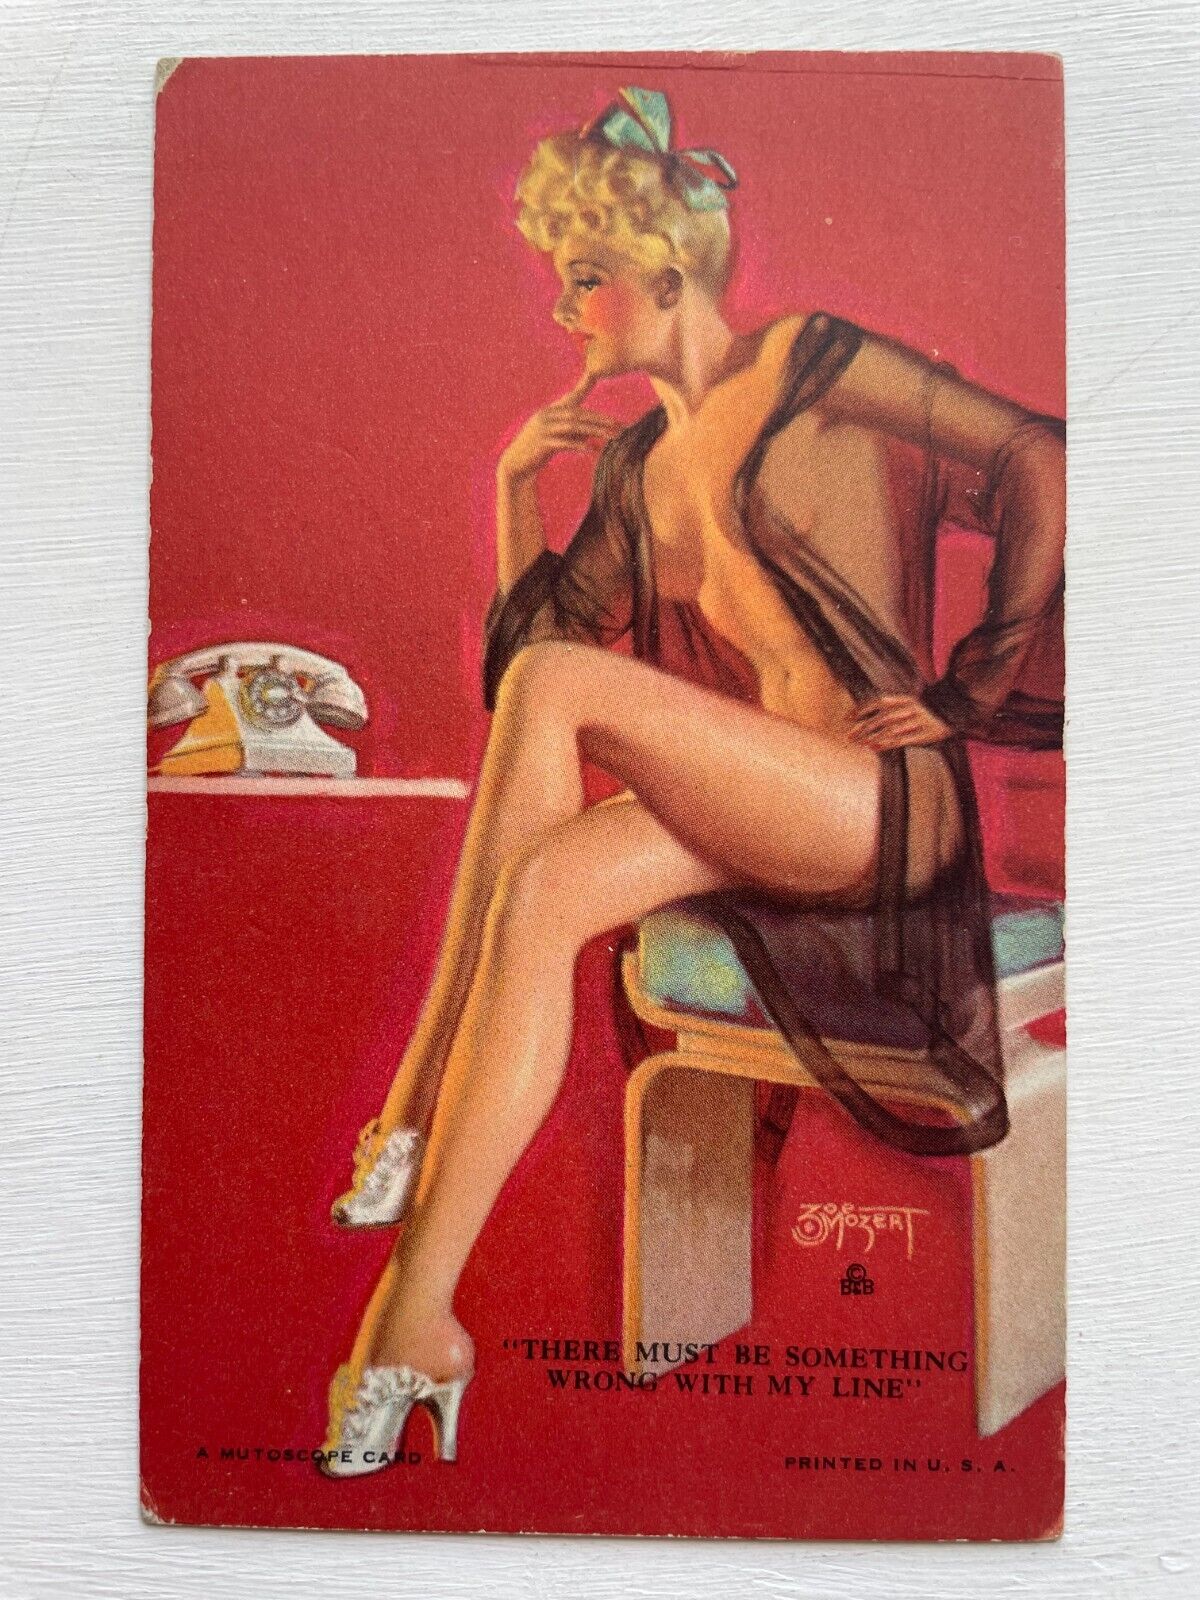 1940's Pinup Girl Picture Mutoscope Card by Zoe Mozert- Blond Waiting For Phone